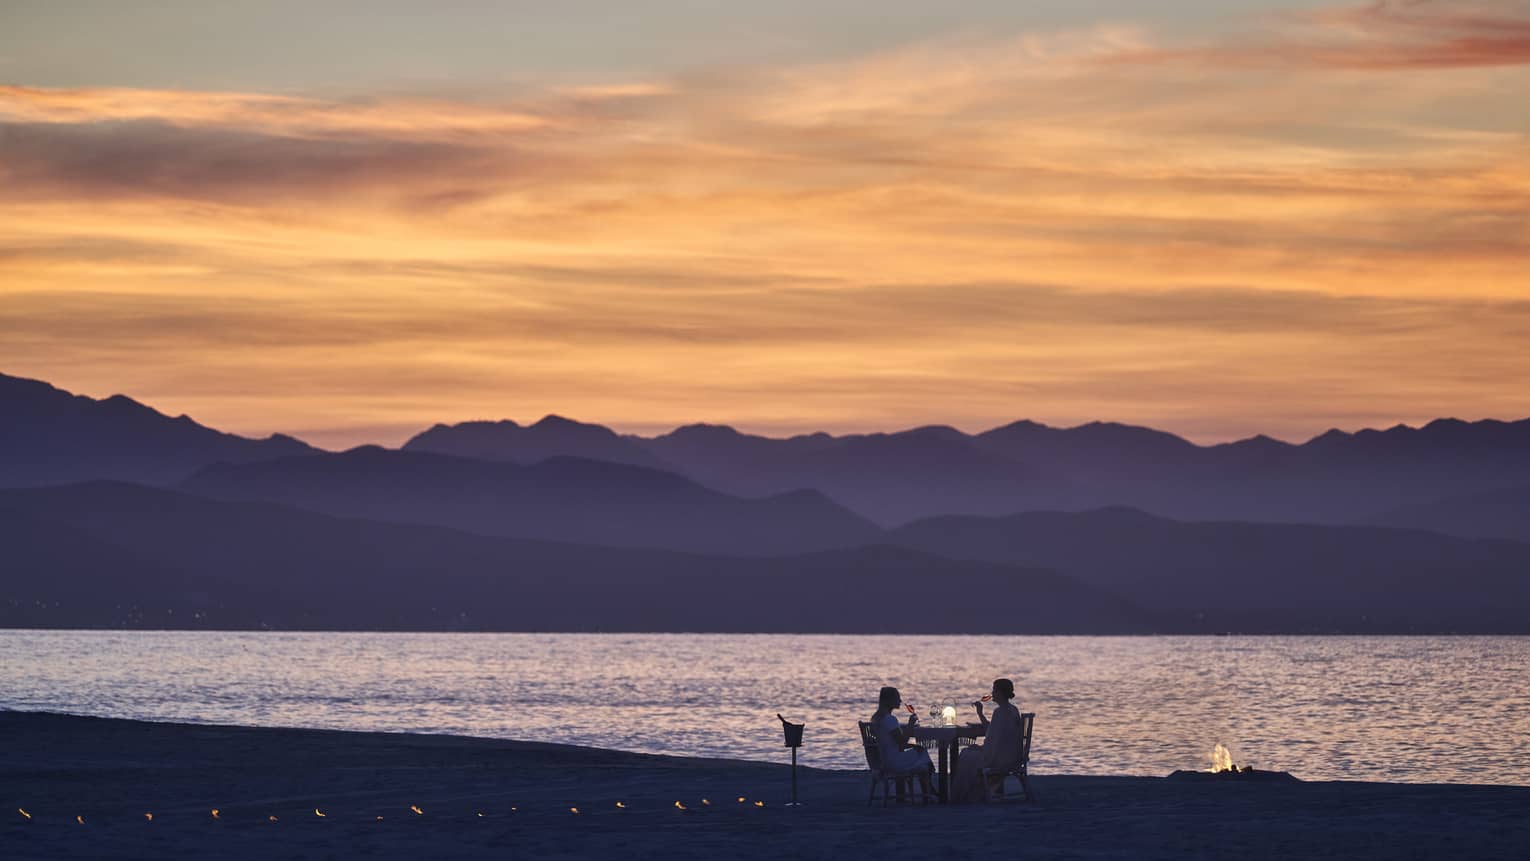 A couple dining on a beach during sunset, the mountains in the background look purple while the sky is orange and pink.